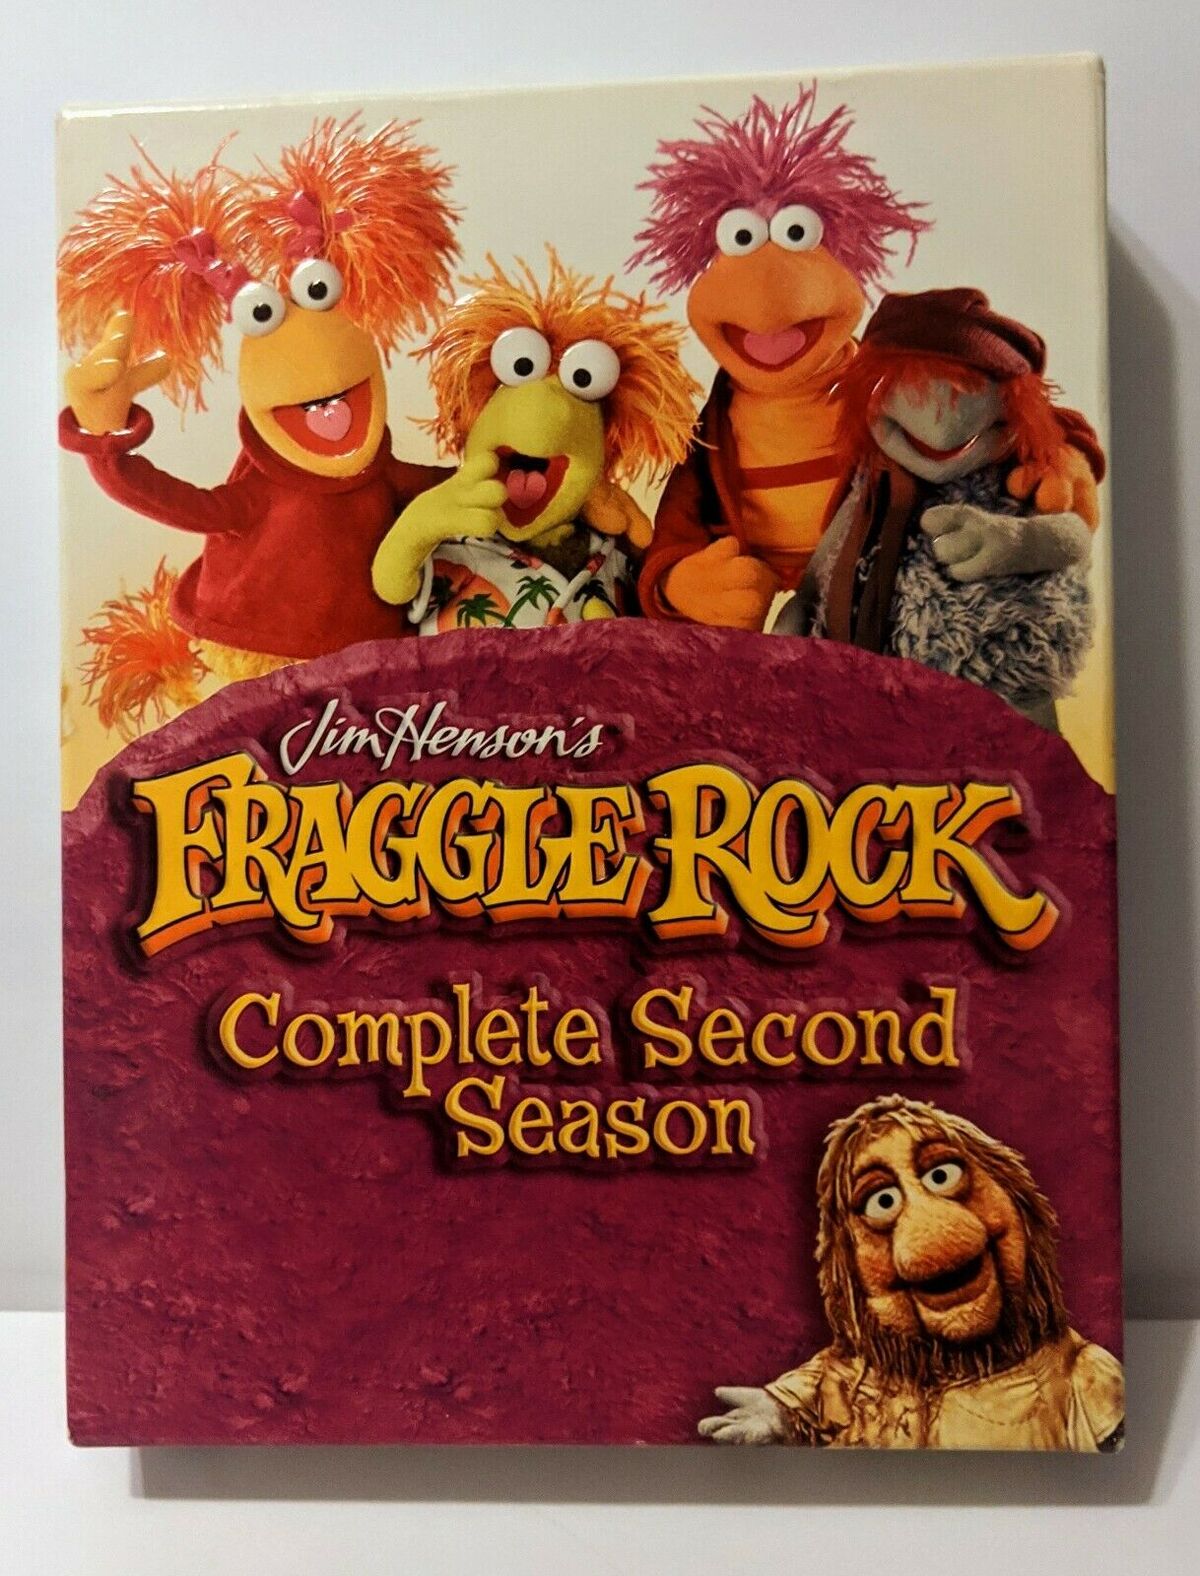 Fraggle Rock: Complete Series Collection (20-Disc Set)